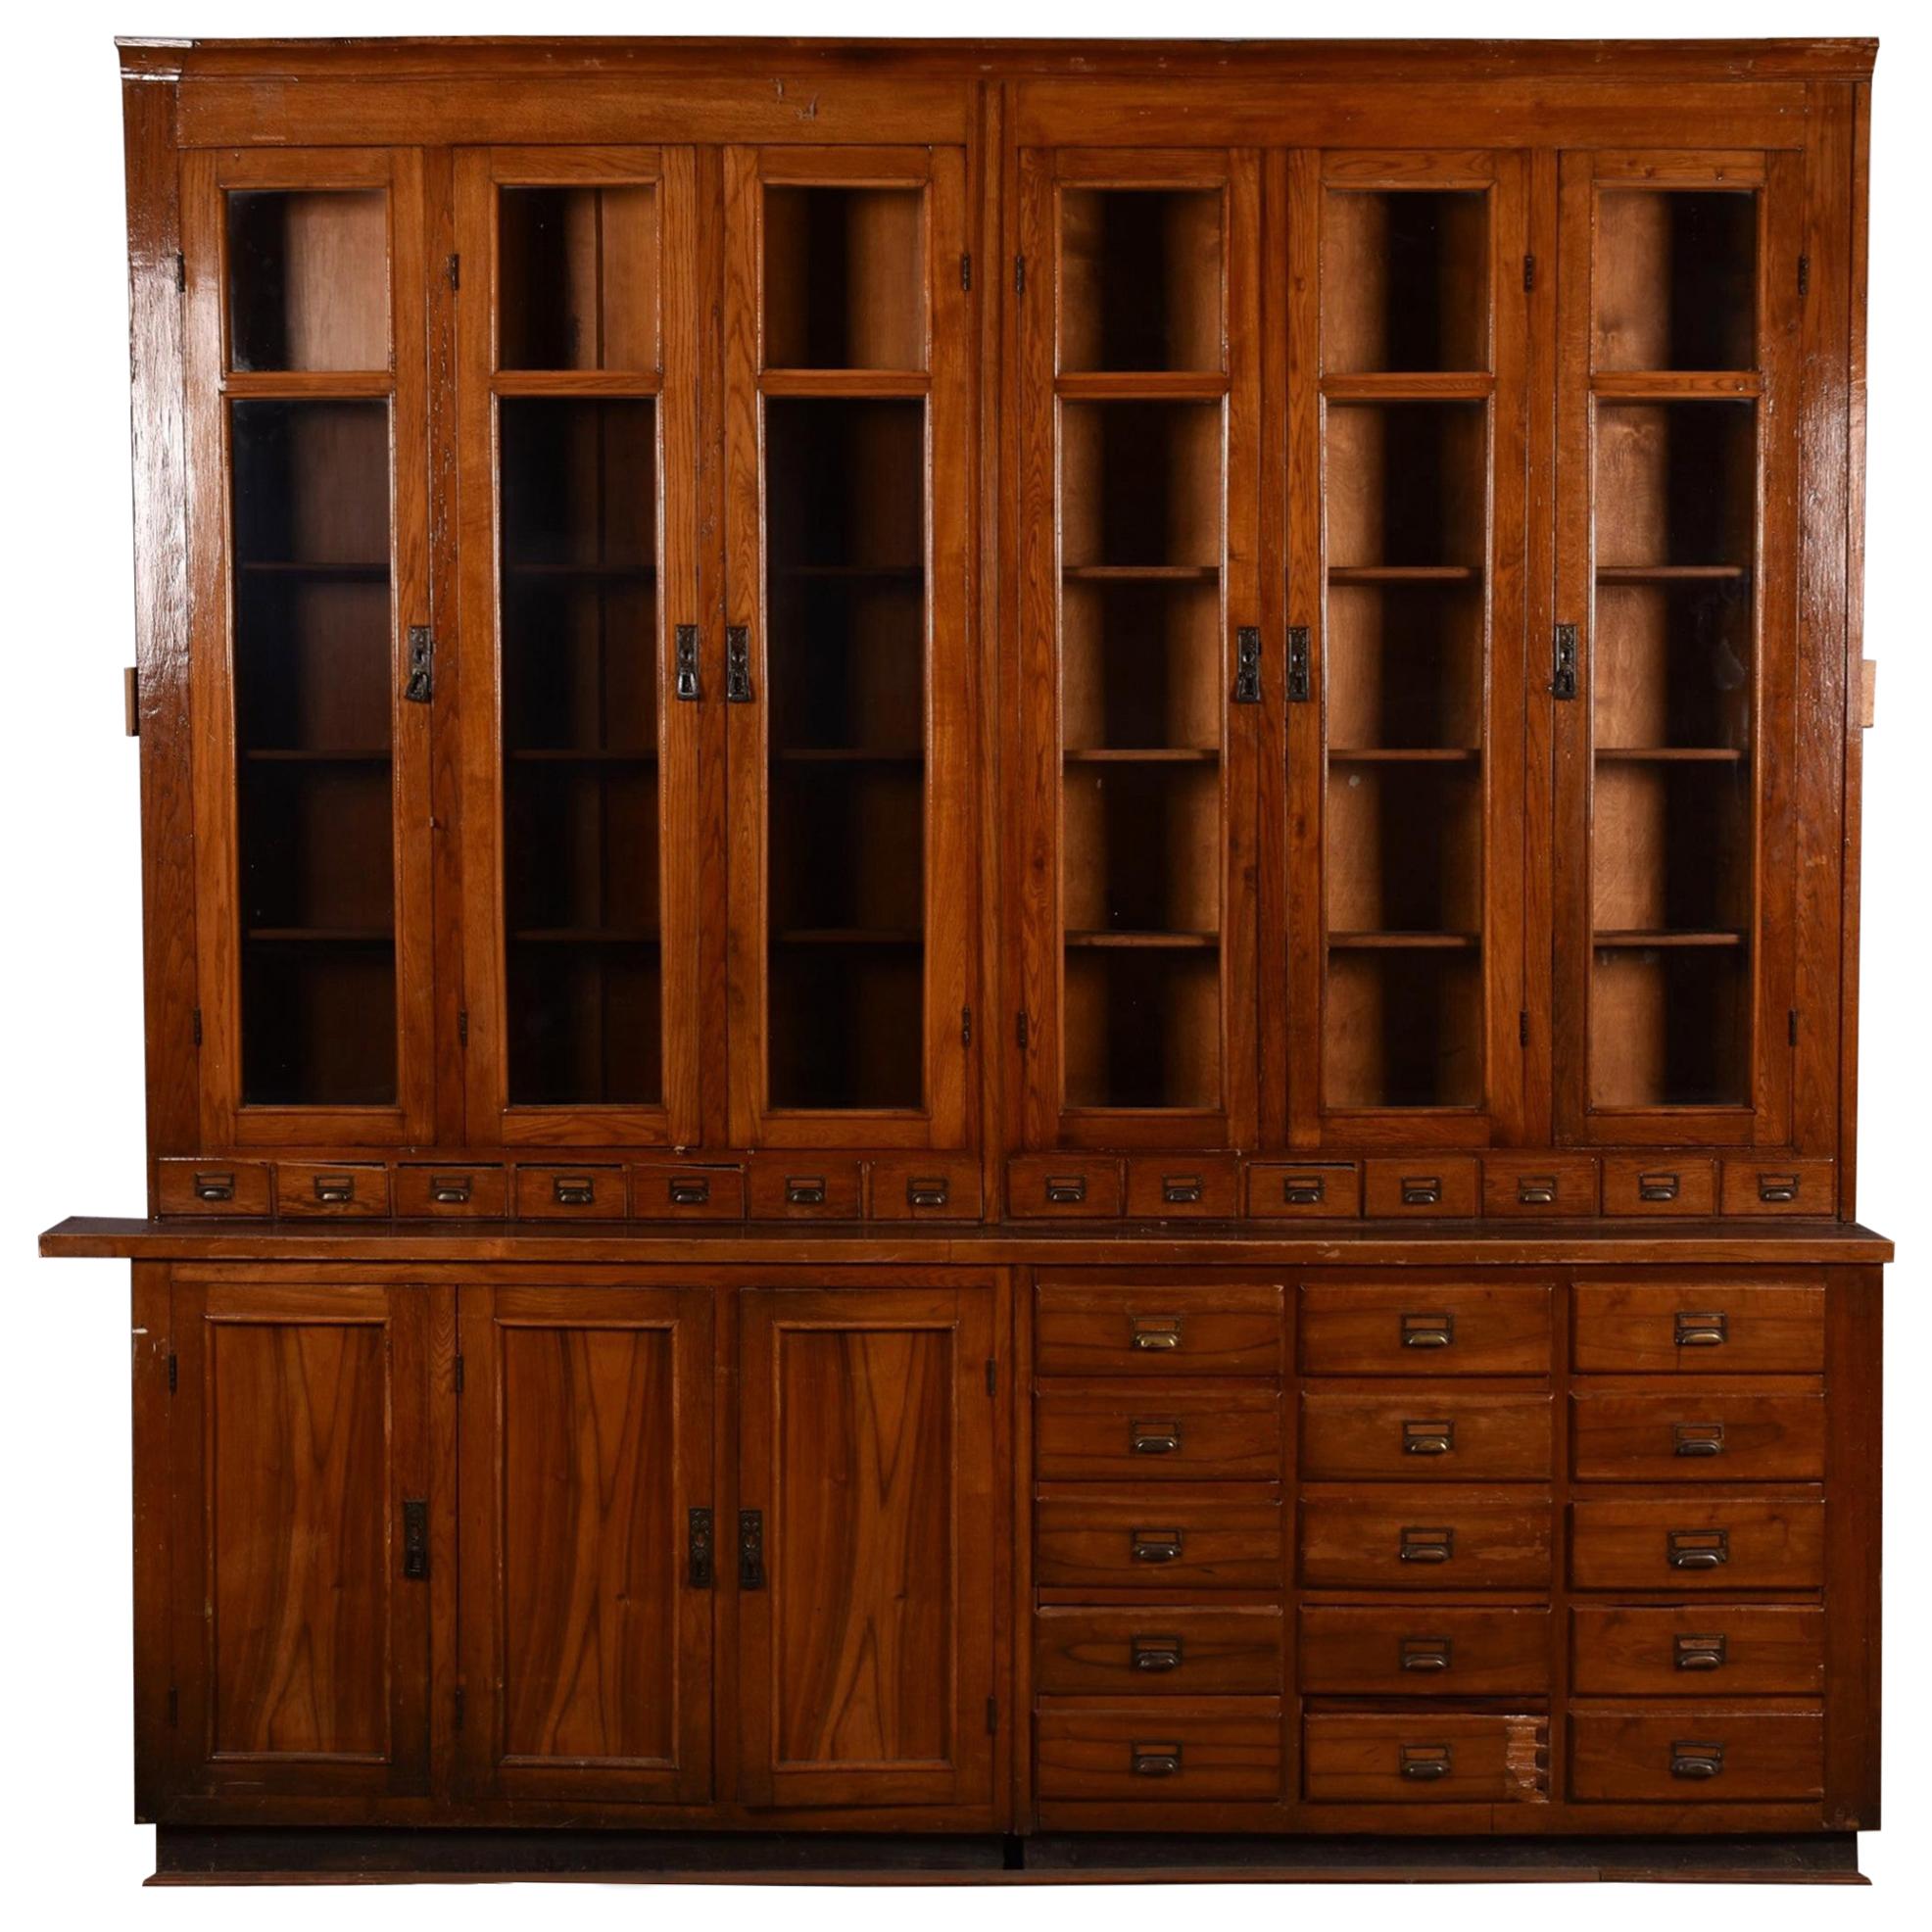 Apothecary No.7

Apothecary display cabinet circa 1920s Number 7

Apothecary / Pharmacy / Chemist / Shop Display / Restaurant cabinet, circa 1920s

Large Apothecary Pharmacy beech display cabinet dating to circa 1920s, This piece is one of